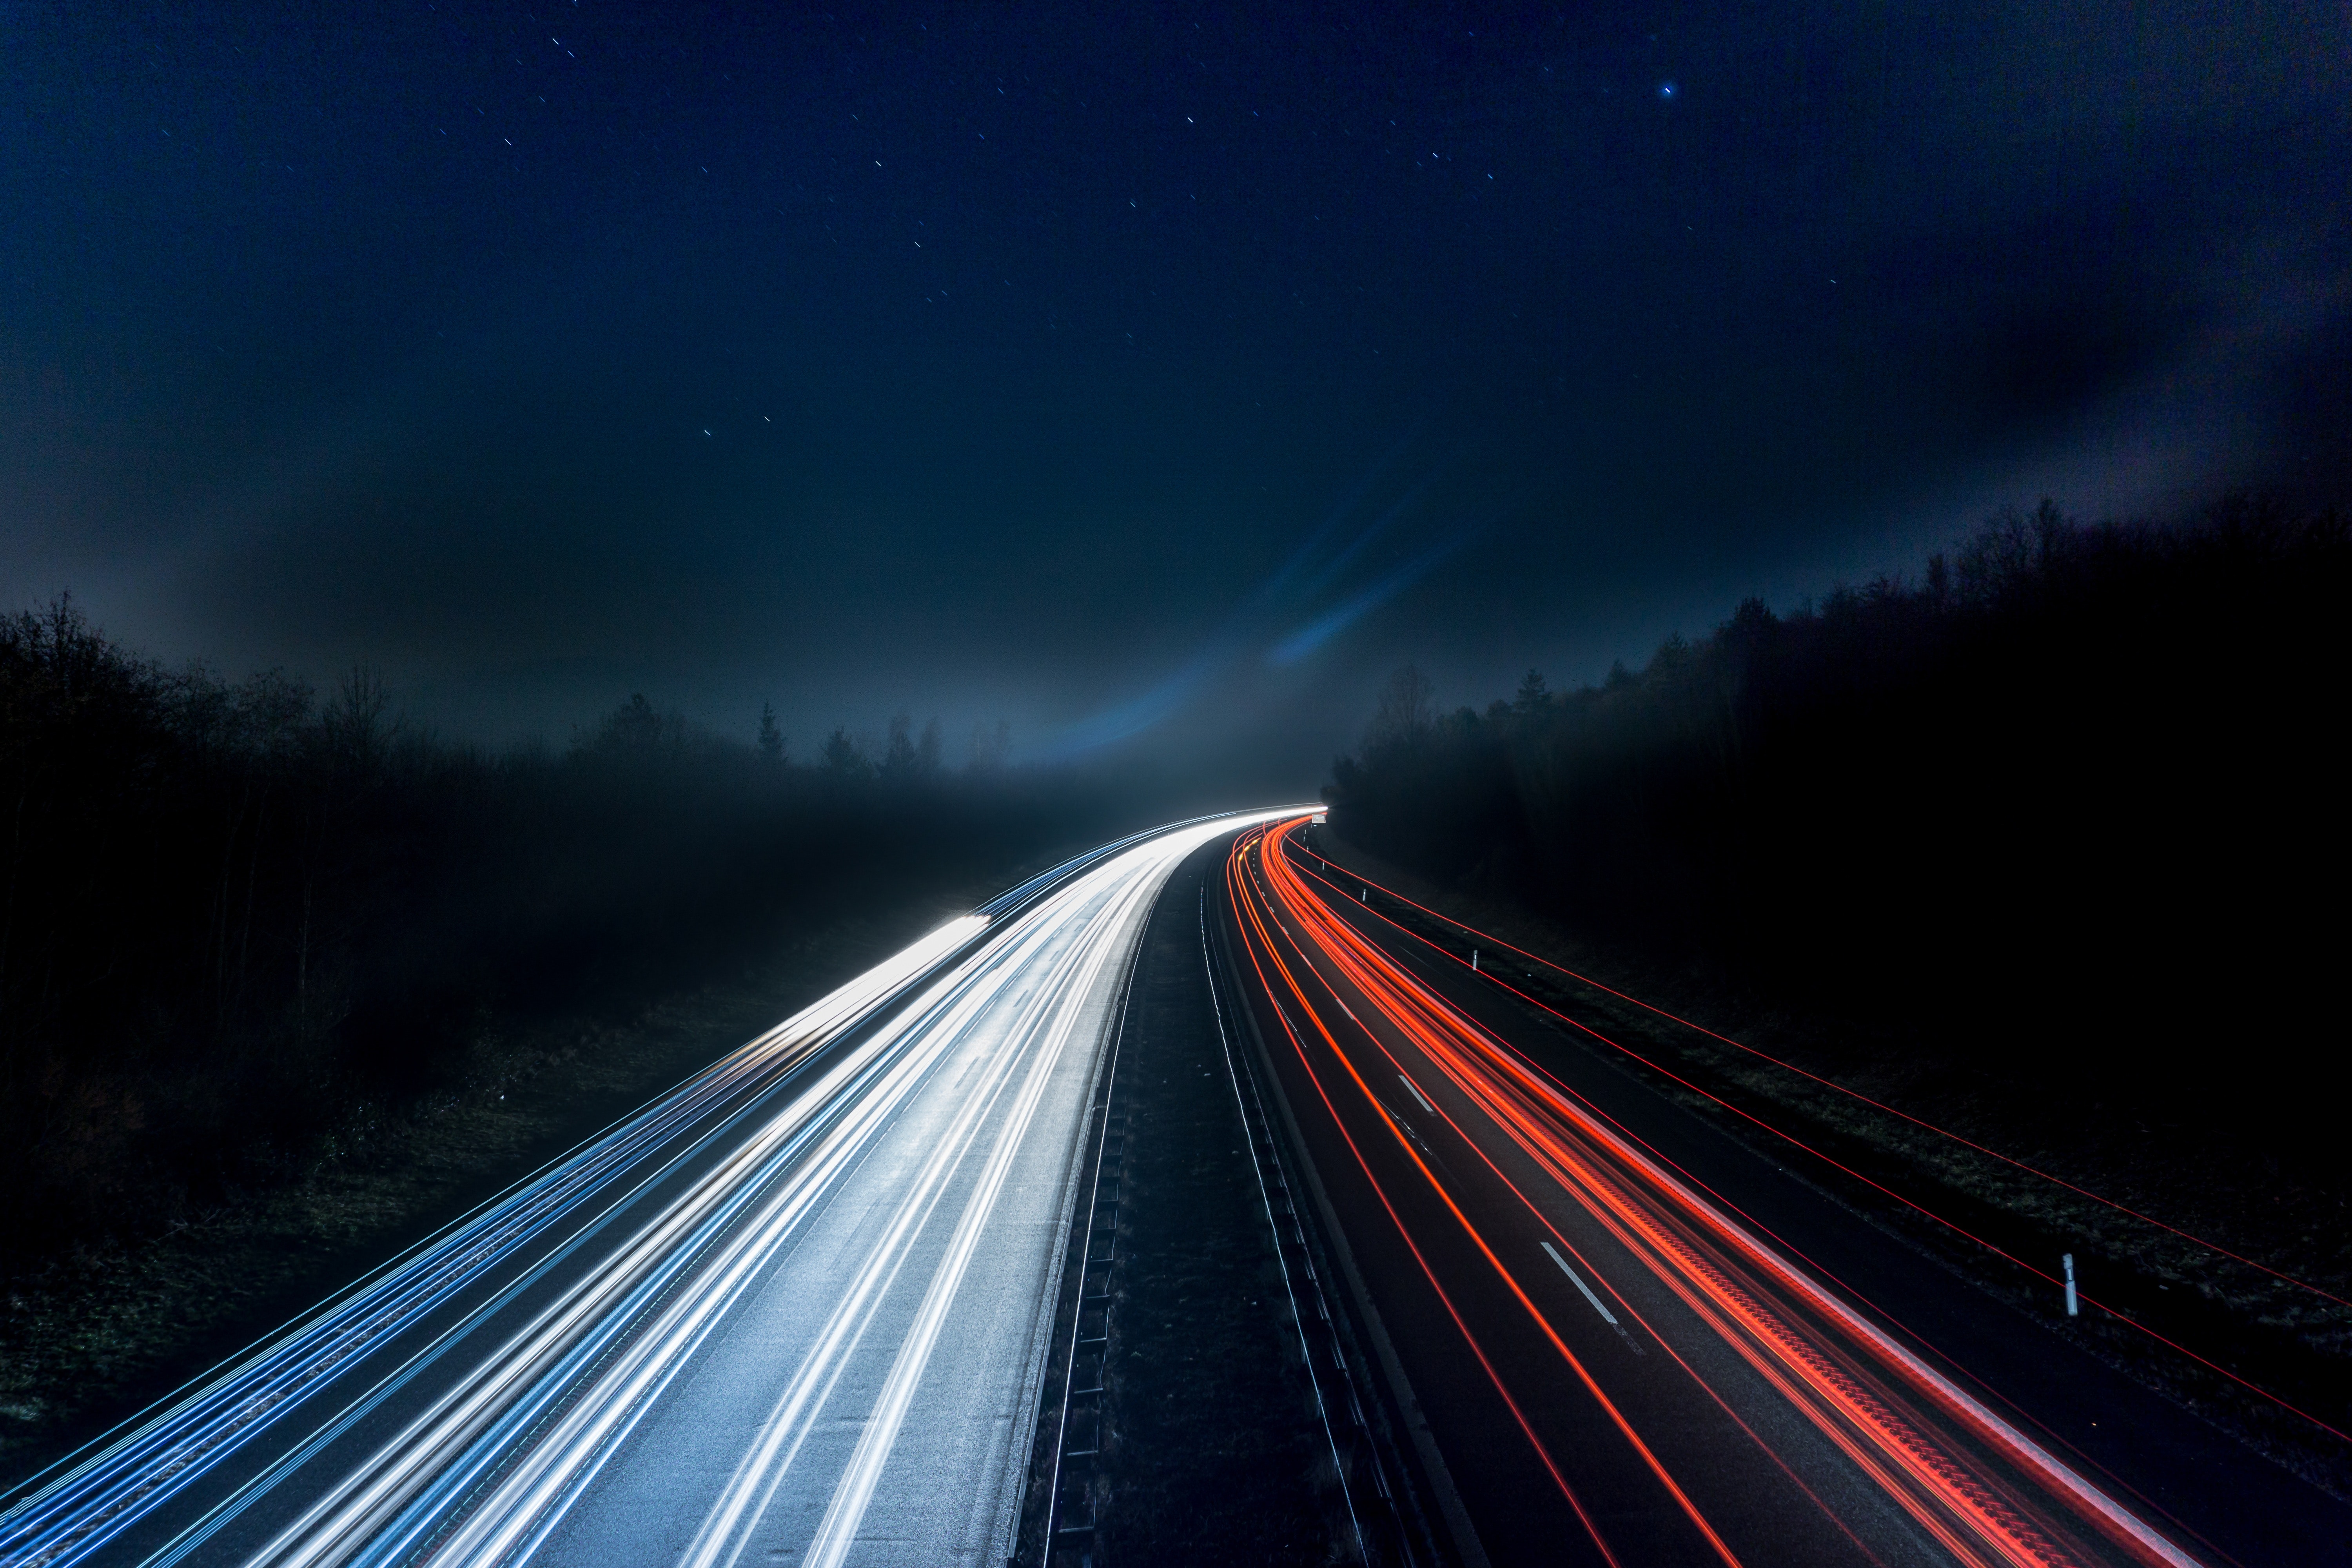 Light Trails on Highway at Night · Free Stock Photo